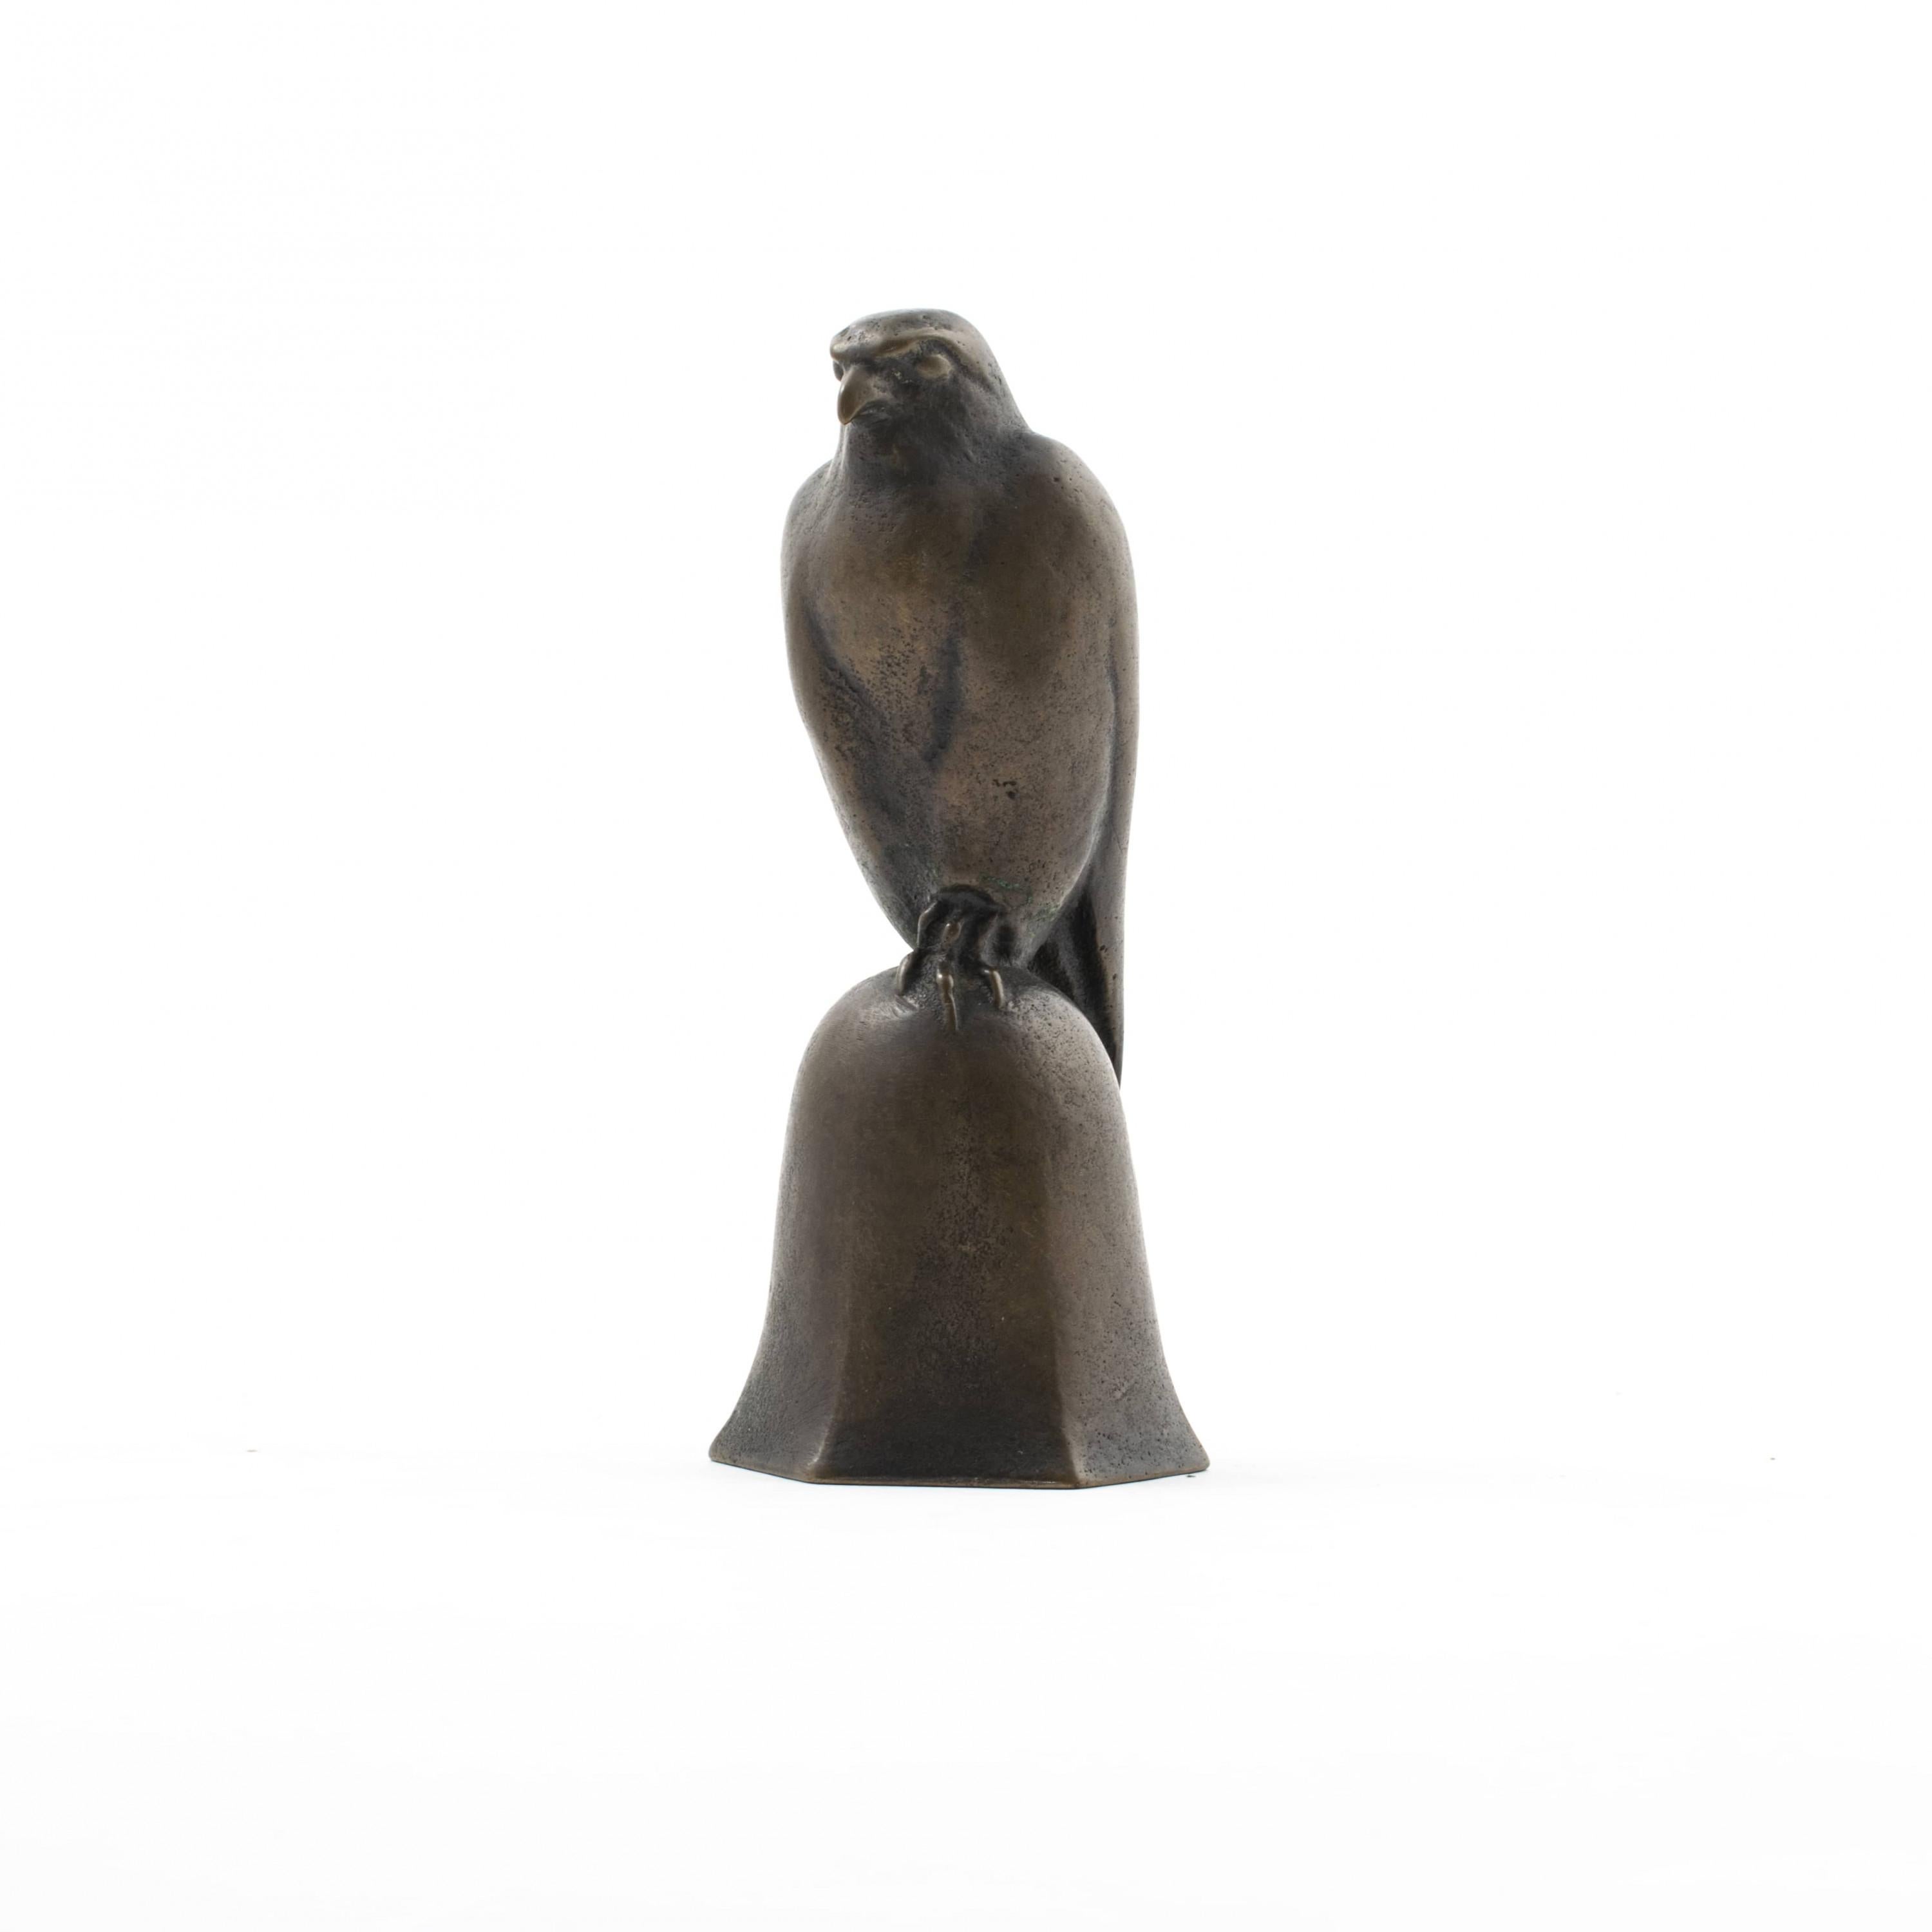 Japanese patinated bronze table bell.
A falcon sitting on a bell.
By Yamamuro Hyakusei 1900 - 1990.
Signed.